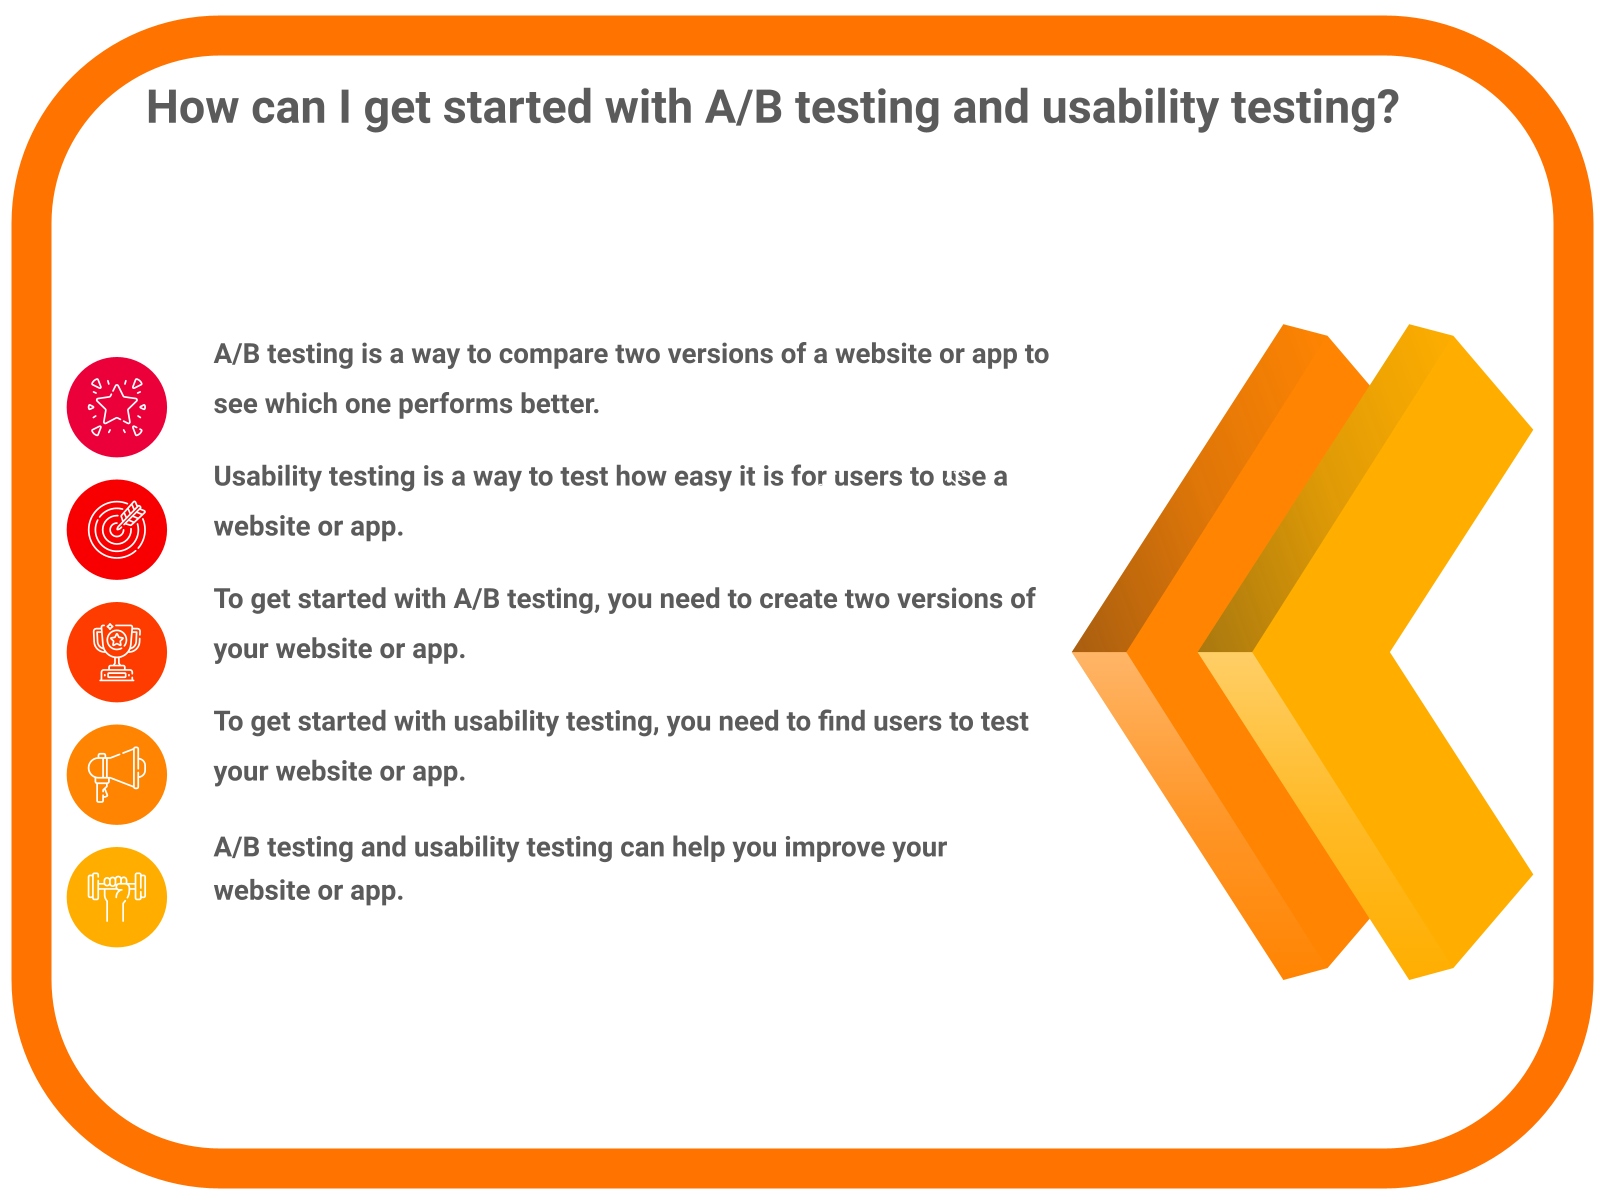 How can I get started with A/B testing and usability testing?